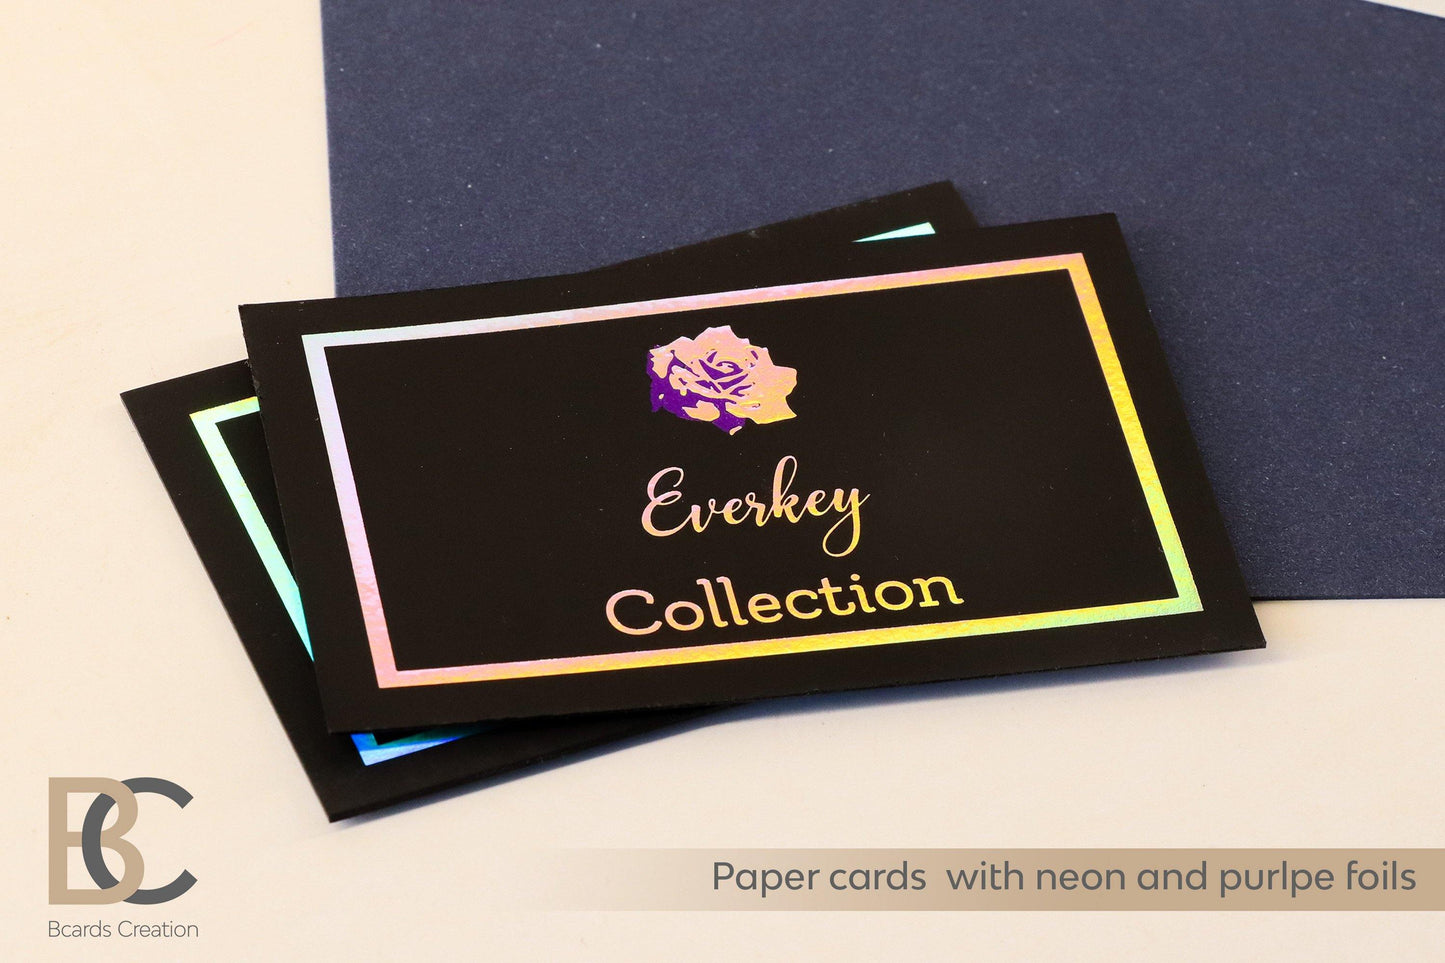 Fine Paper Double layered Business Card with Neon and Purple Foils, Thick Colored Paper Holographic Unique Business Cards - BcardsCreation